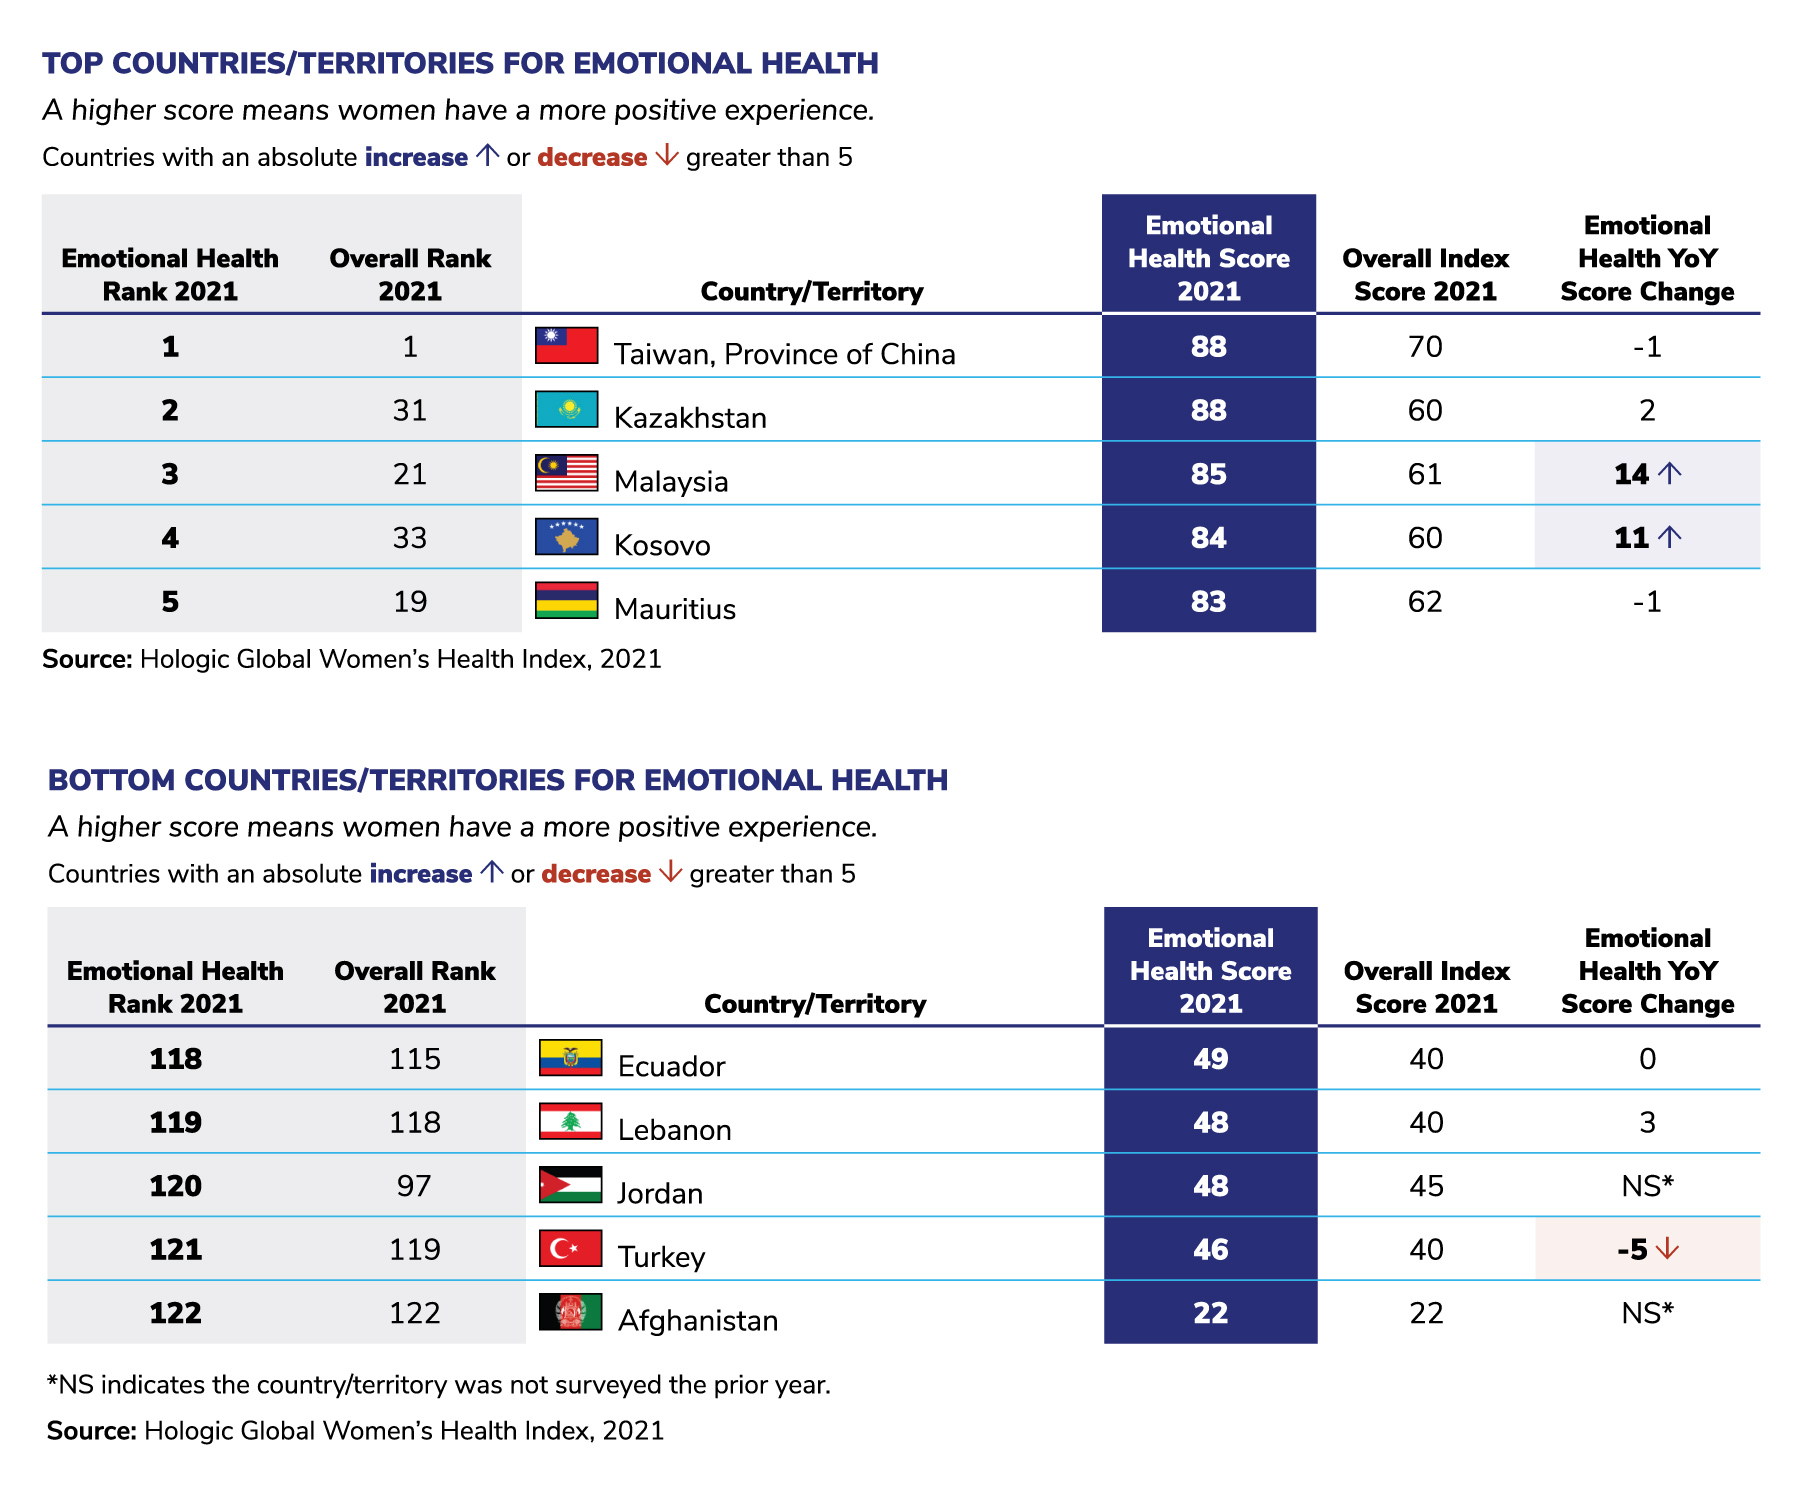 Table 2.1: Country Rankings on Women’s Emotional Health 